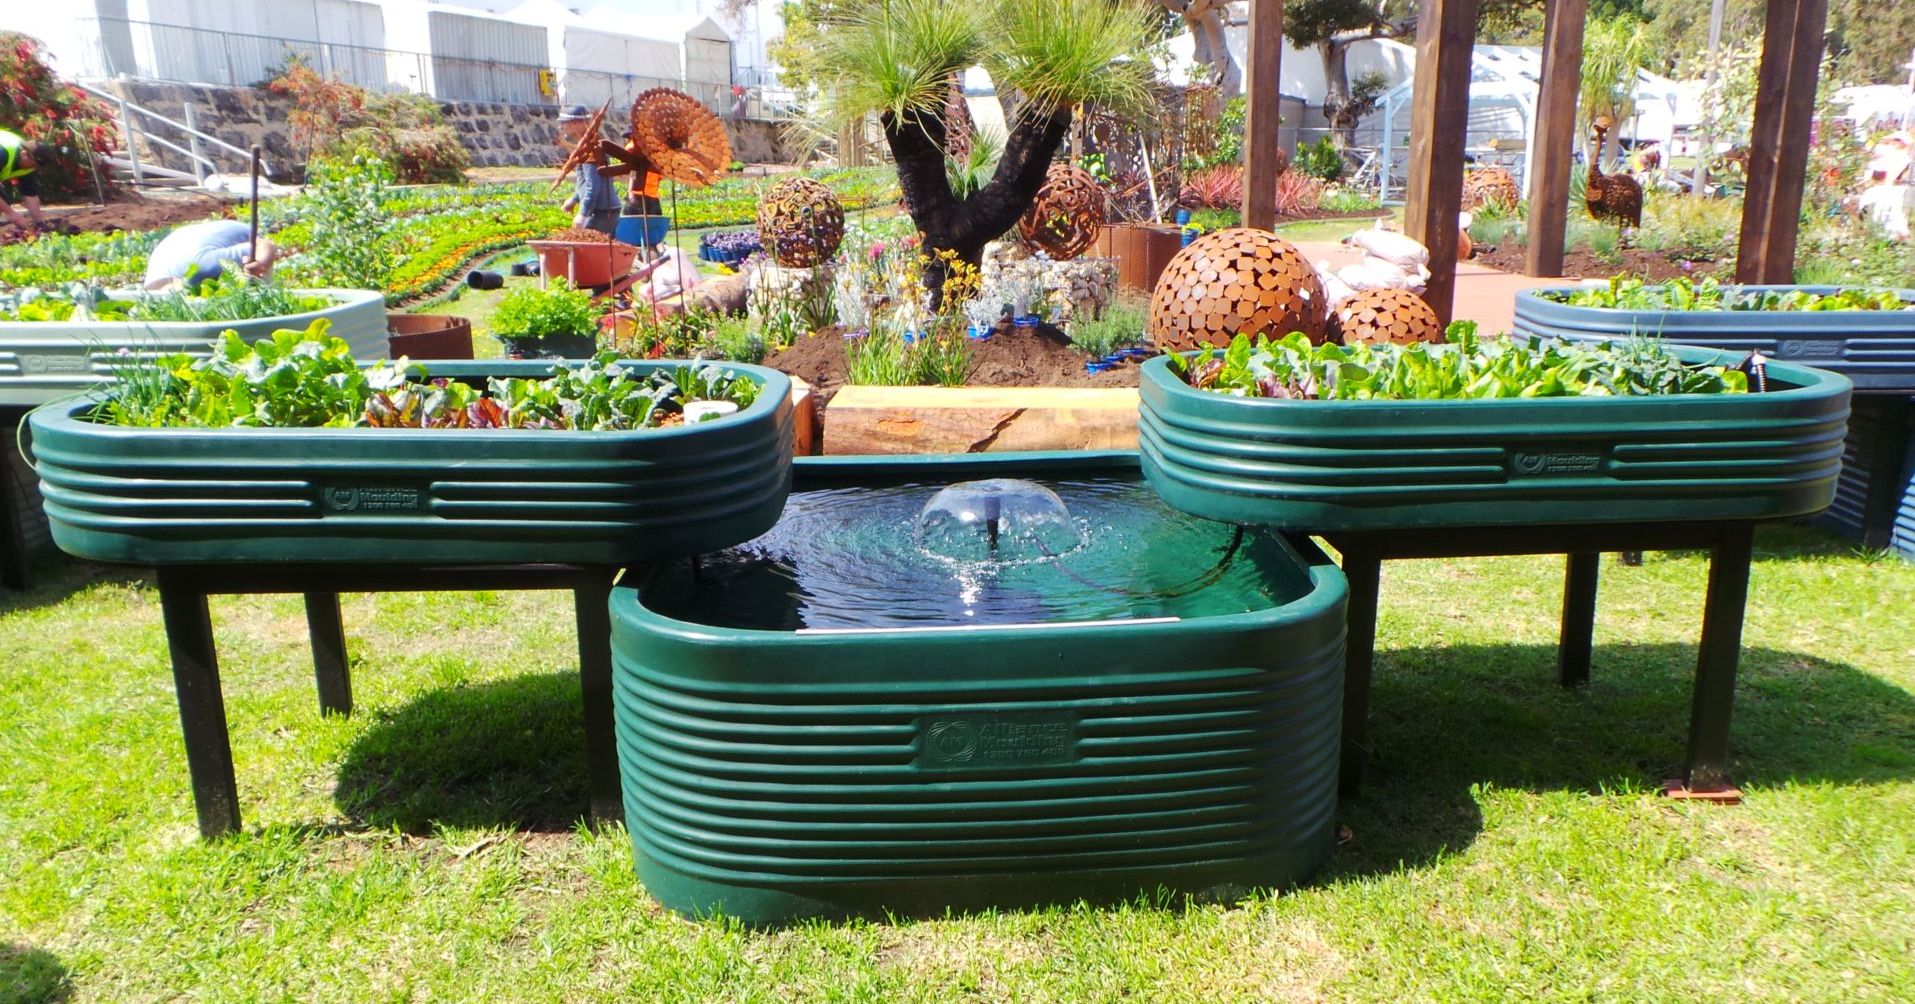 Home aquaponics systems for sale